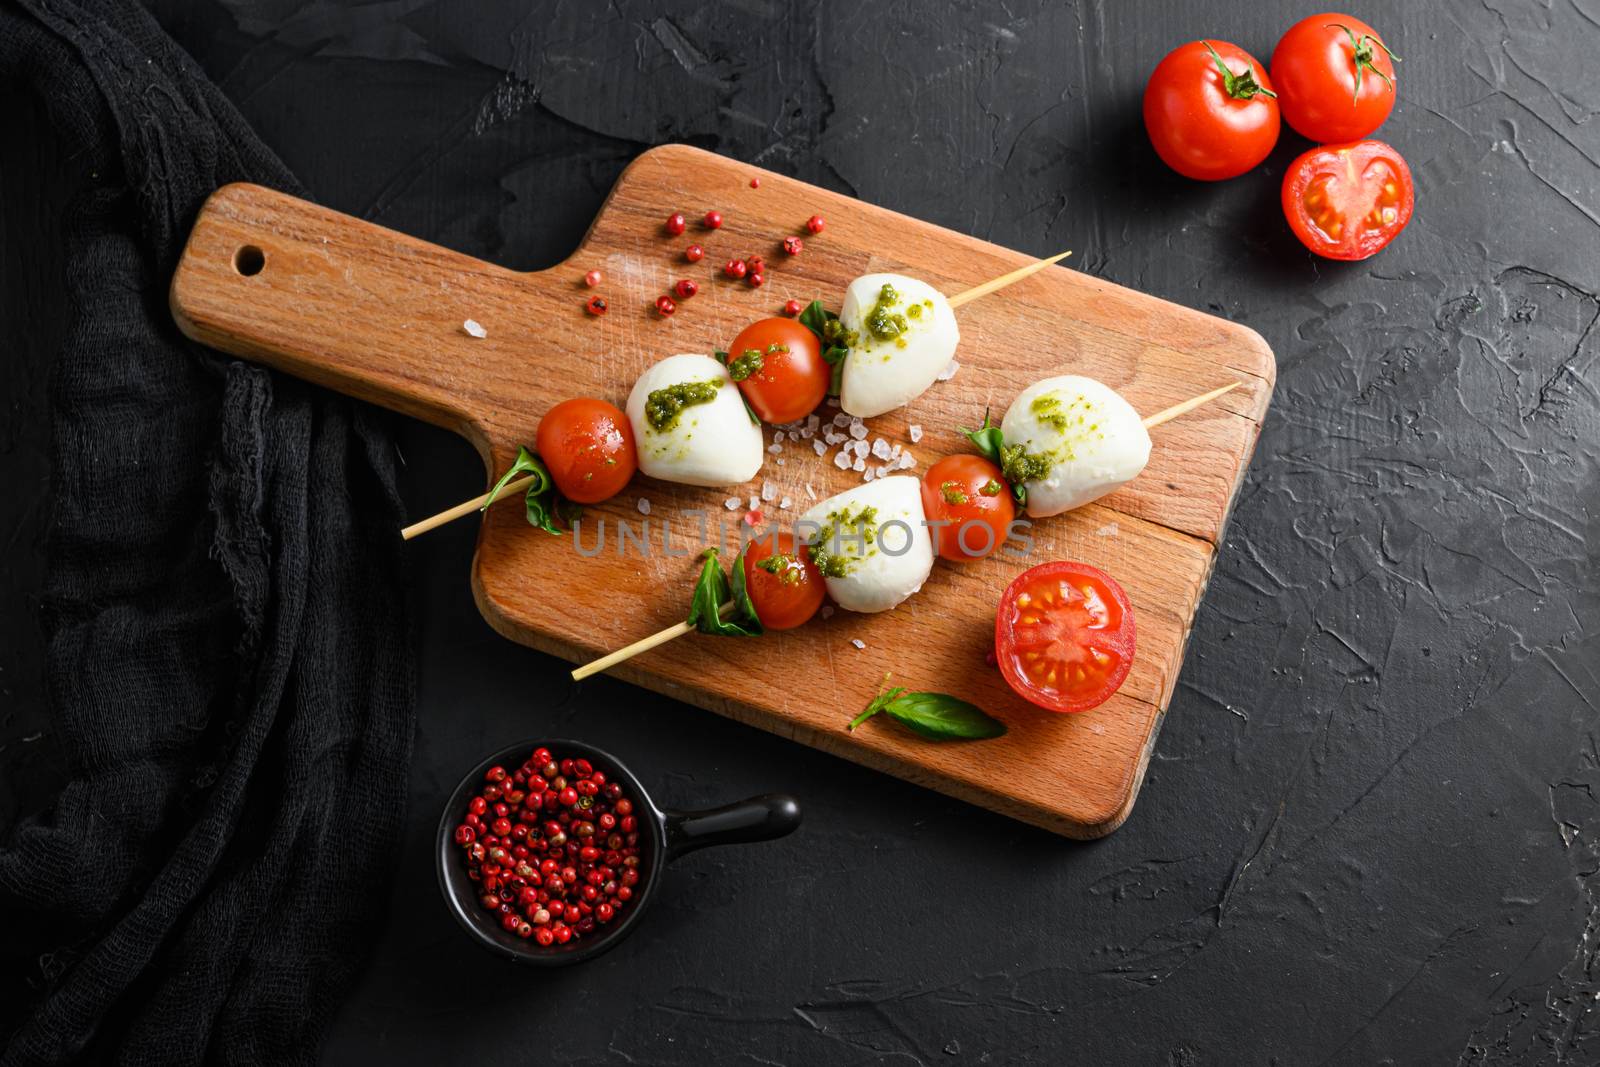 caprese salad skewer with tomato on sticks Italian traditional caprese salad ingredients. Mediterranean food. over black stone background overhead space for text.